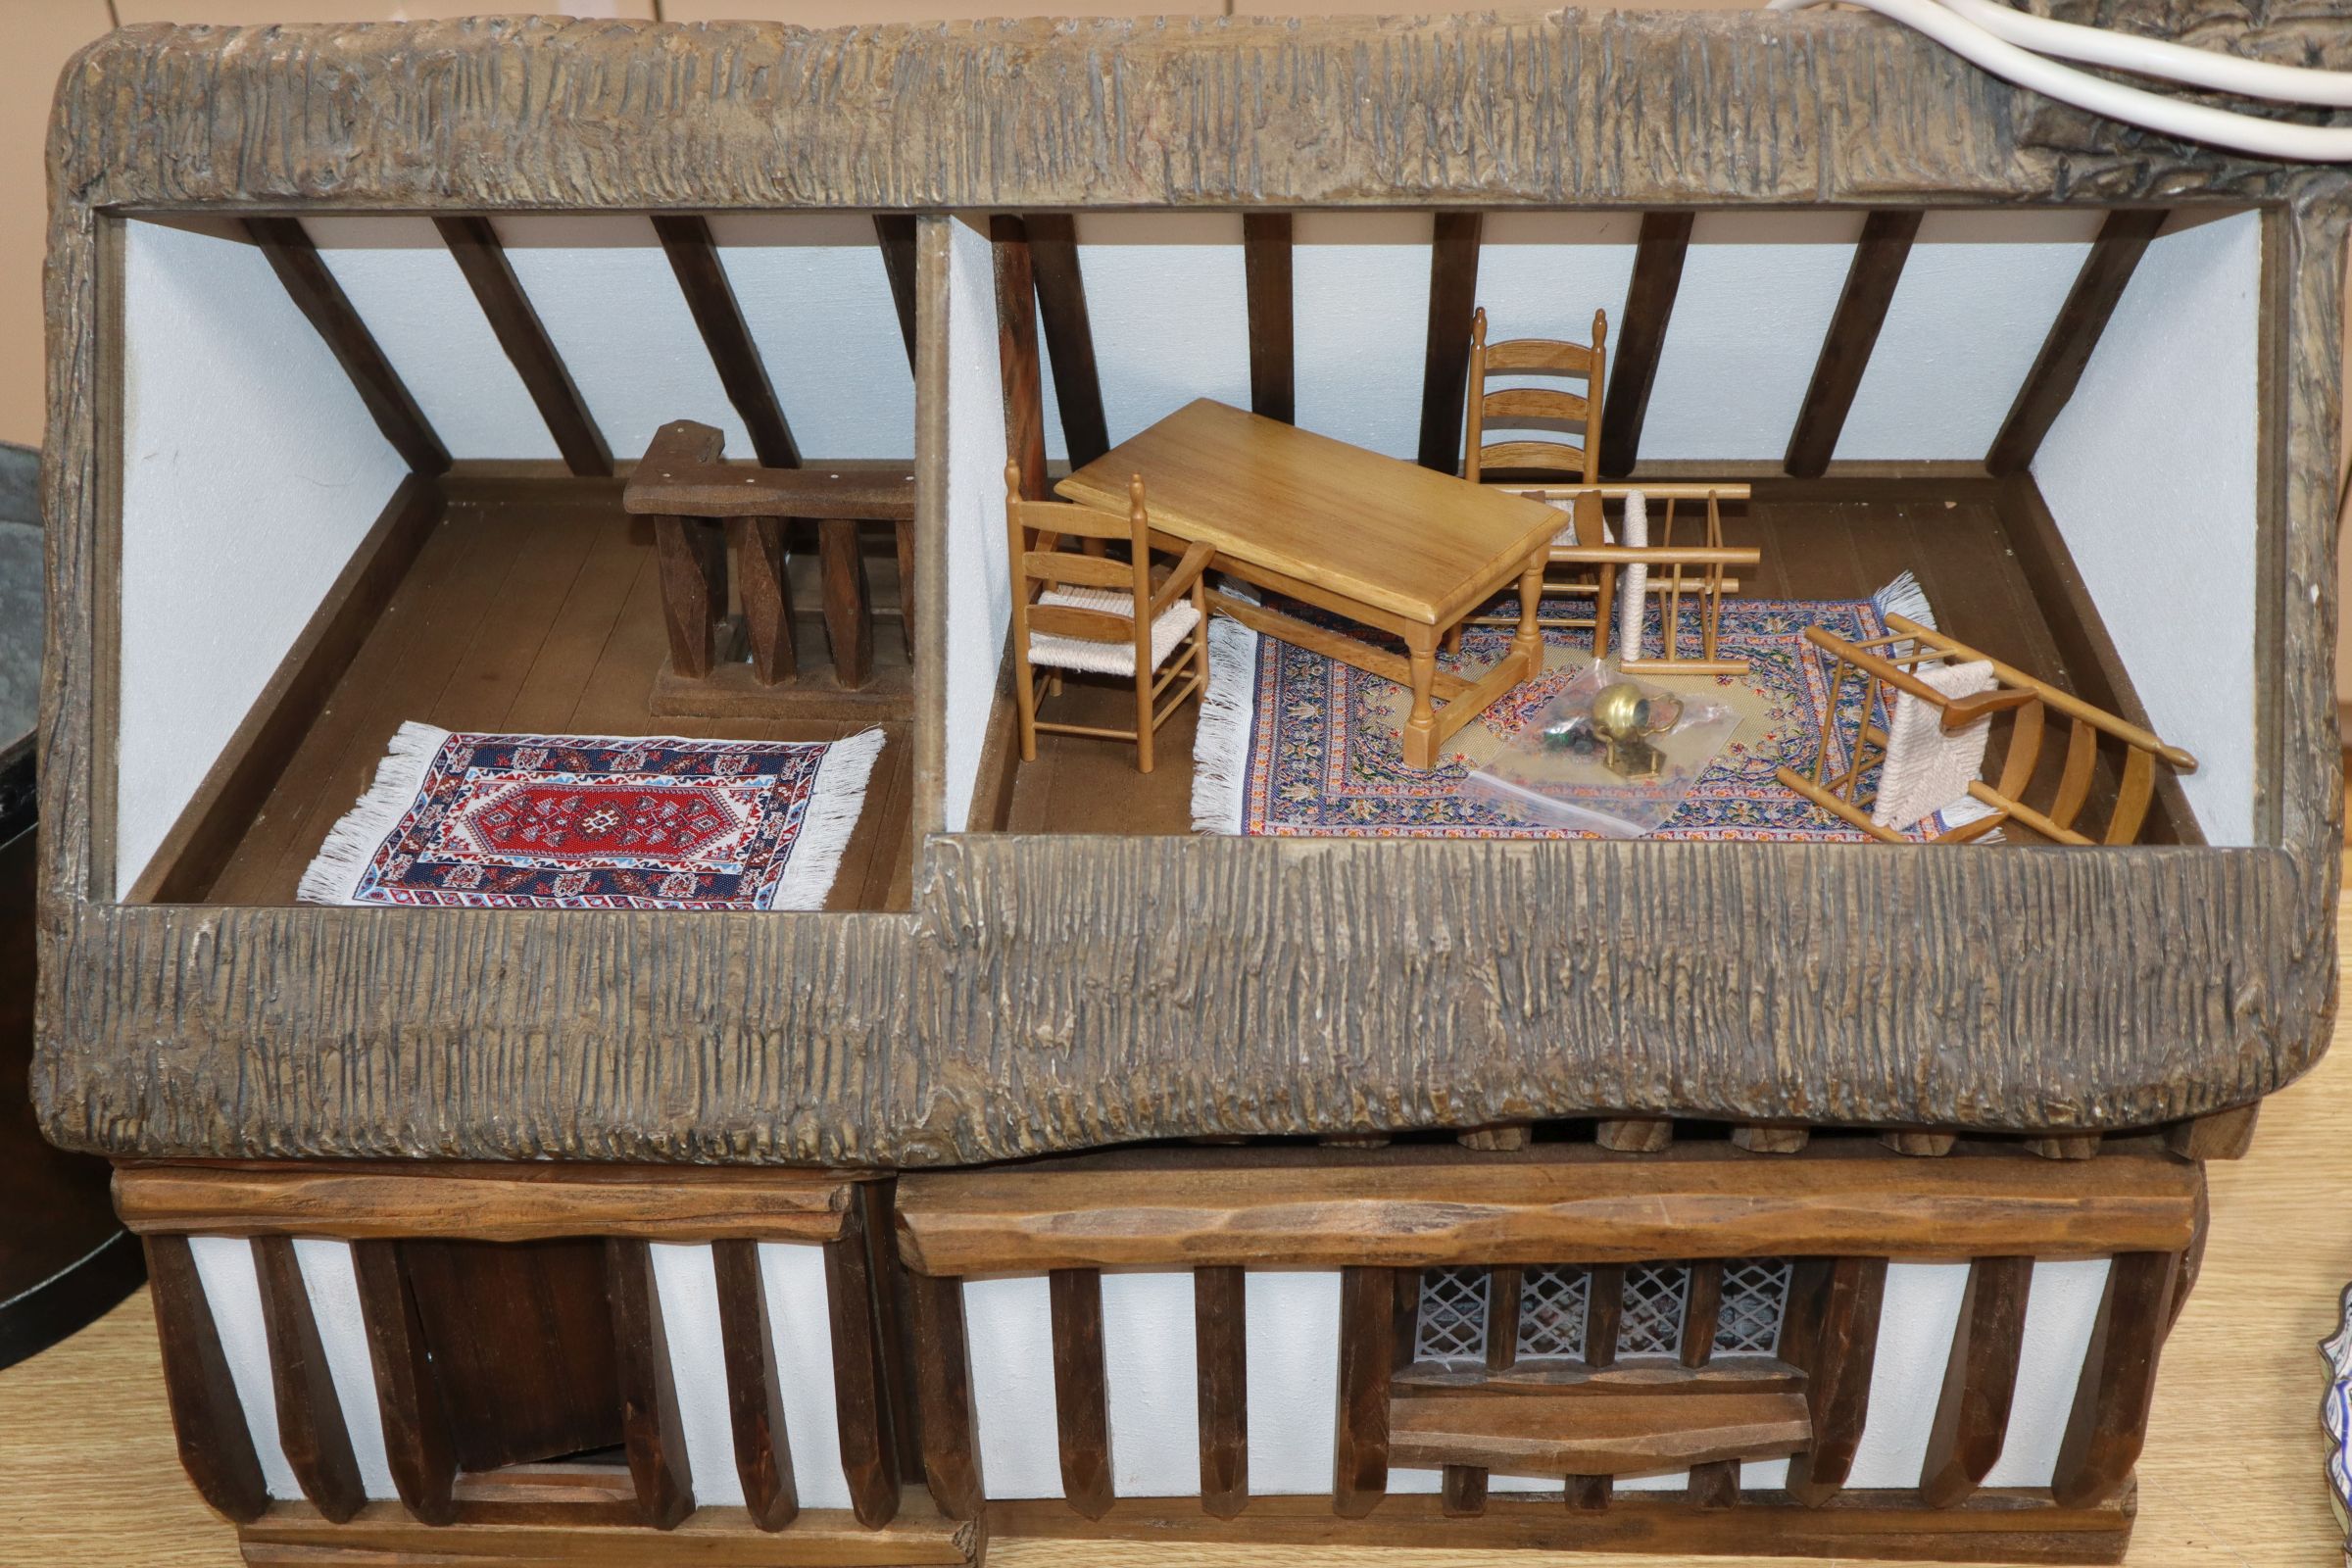 Robert Stubbs cottage style doll's house, dated 1990 - containing some furniture by Jane Norman - Image 2 of 2